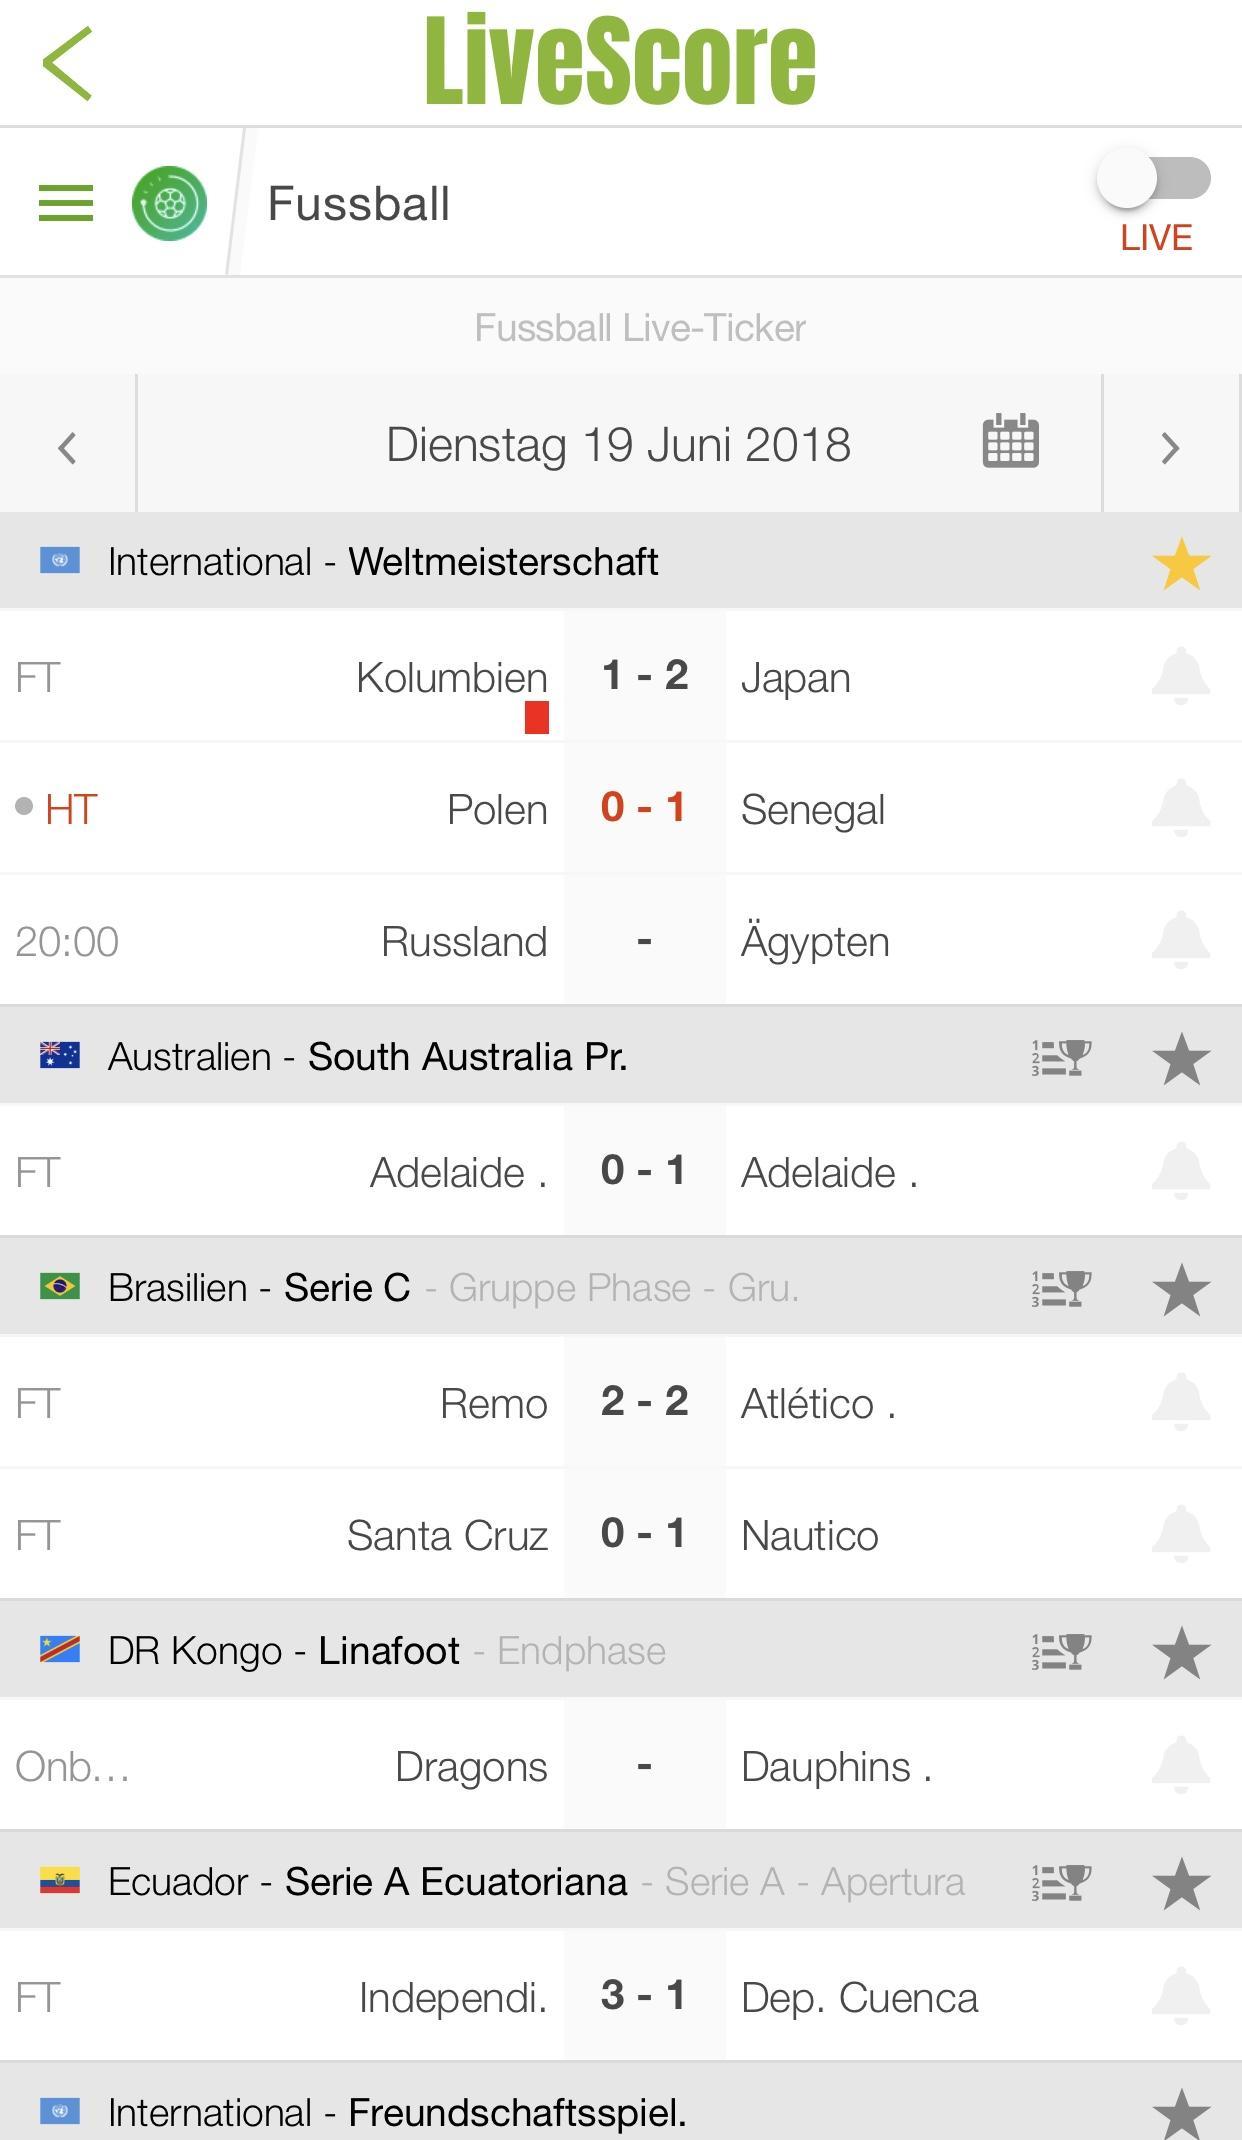 Ergebnisselive - LiveScore - Fussball Live for Android - APK Download